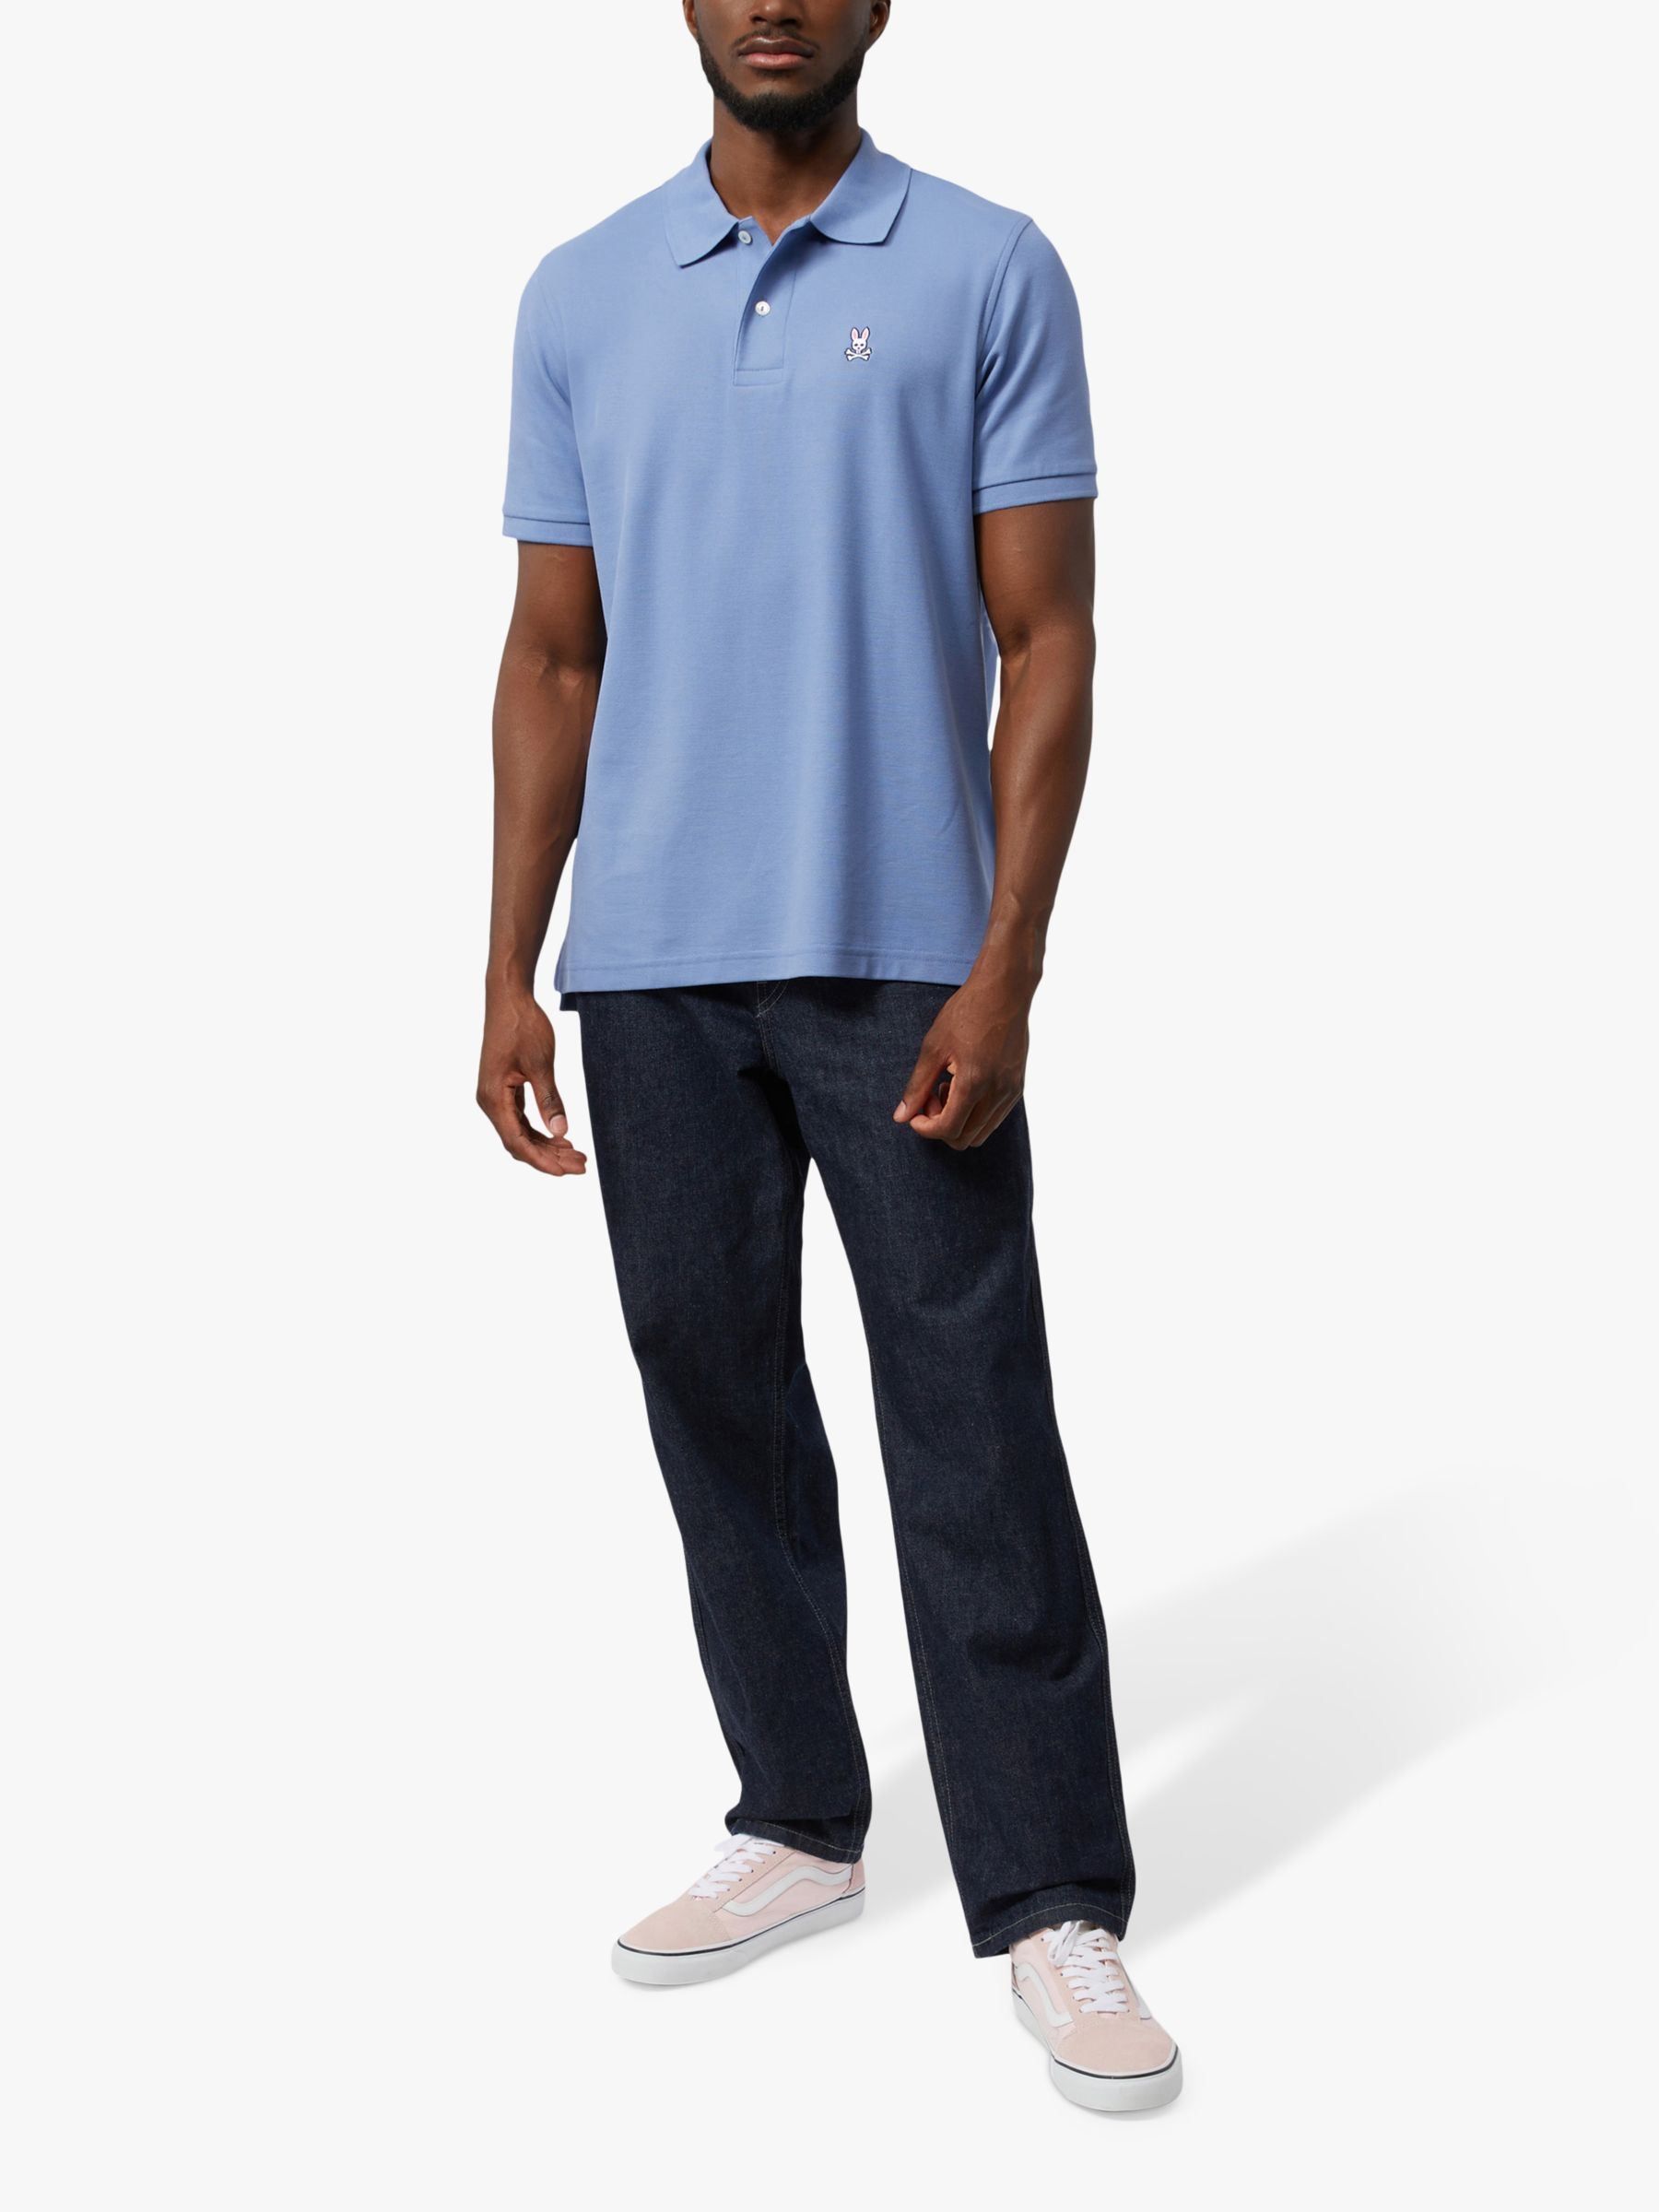 Psycho Bunny Classic Polo Top, Bal Harbour, S